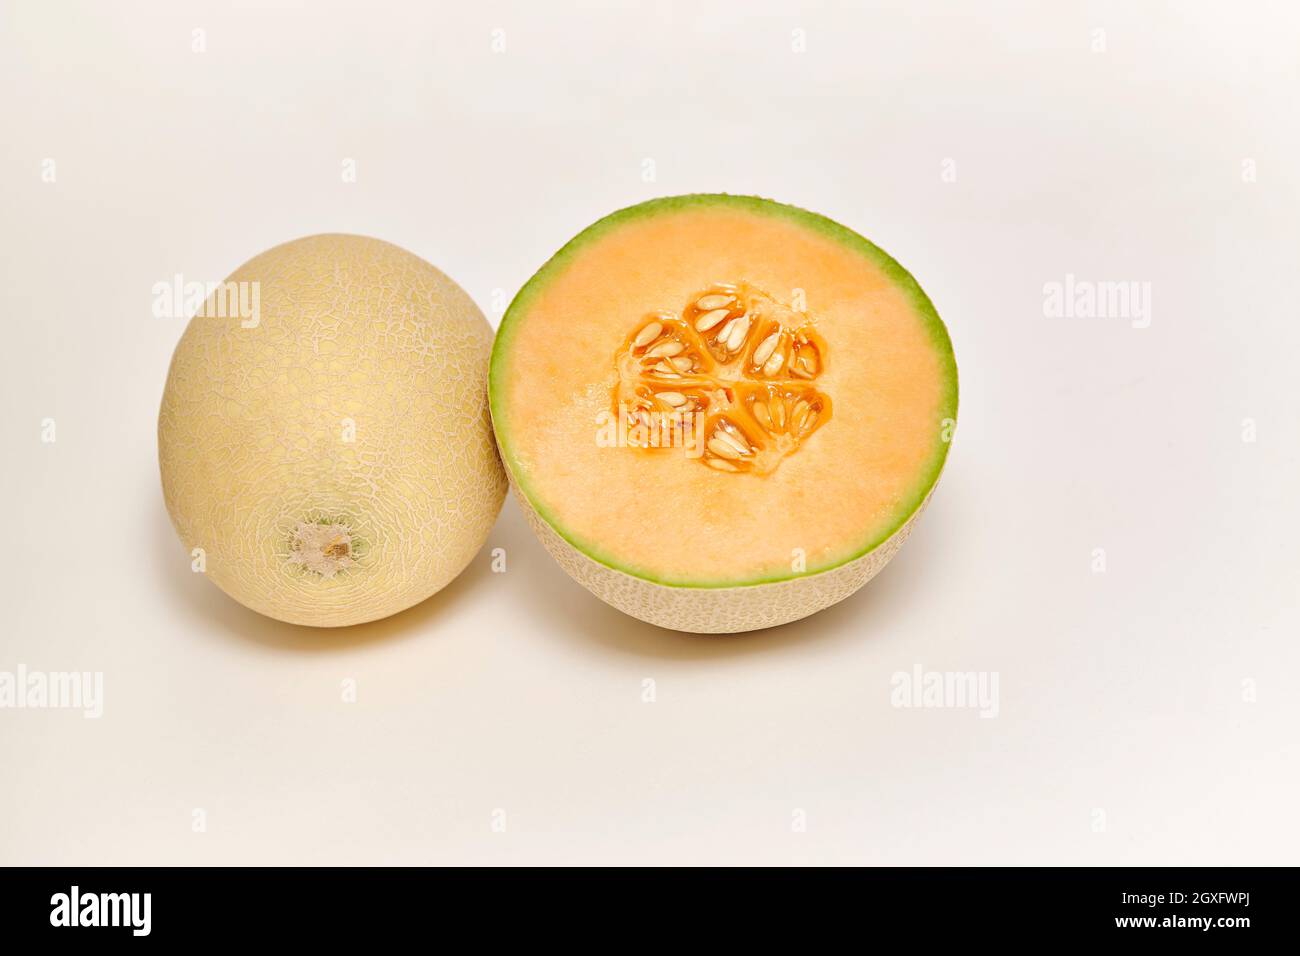 Whole and sliced Japanese melon, honey melon or Cantaloupe (Cucumis melo) on a white background Stock Photo